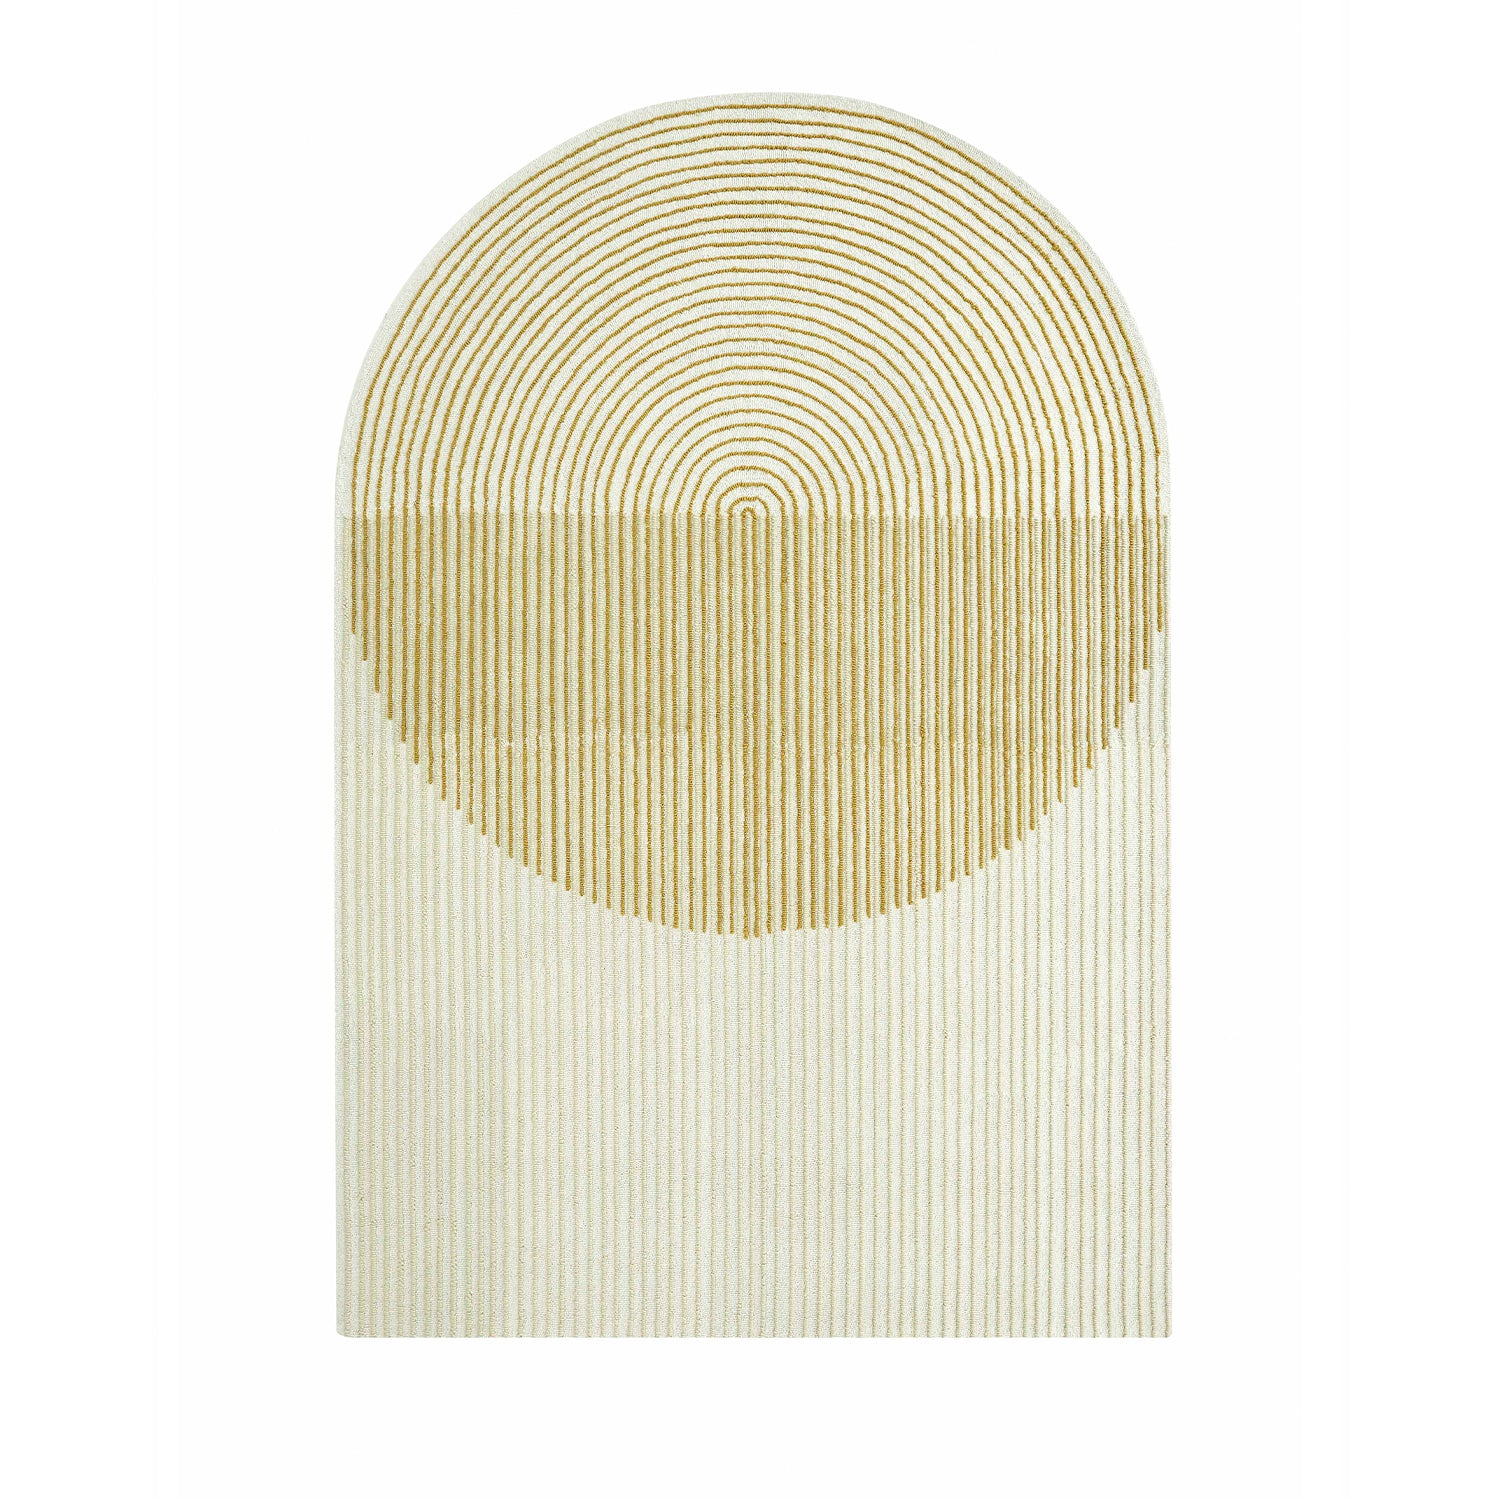 Ply Yellow - The Design Choice